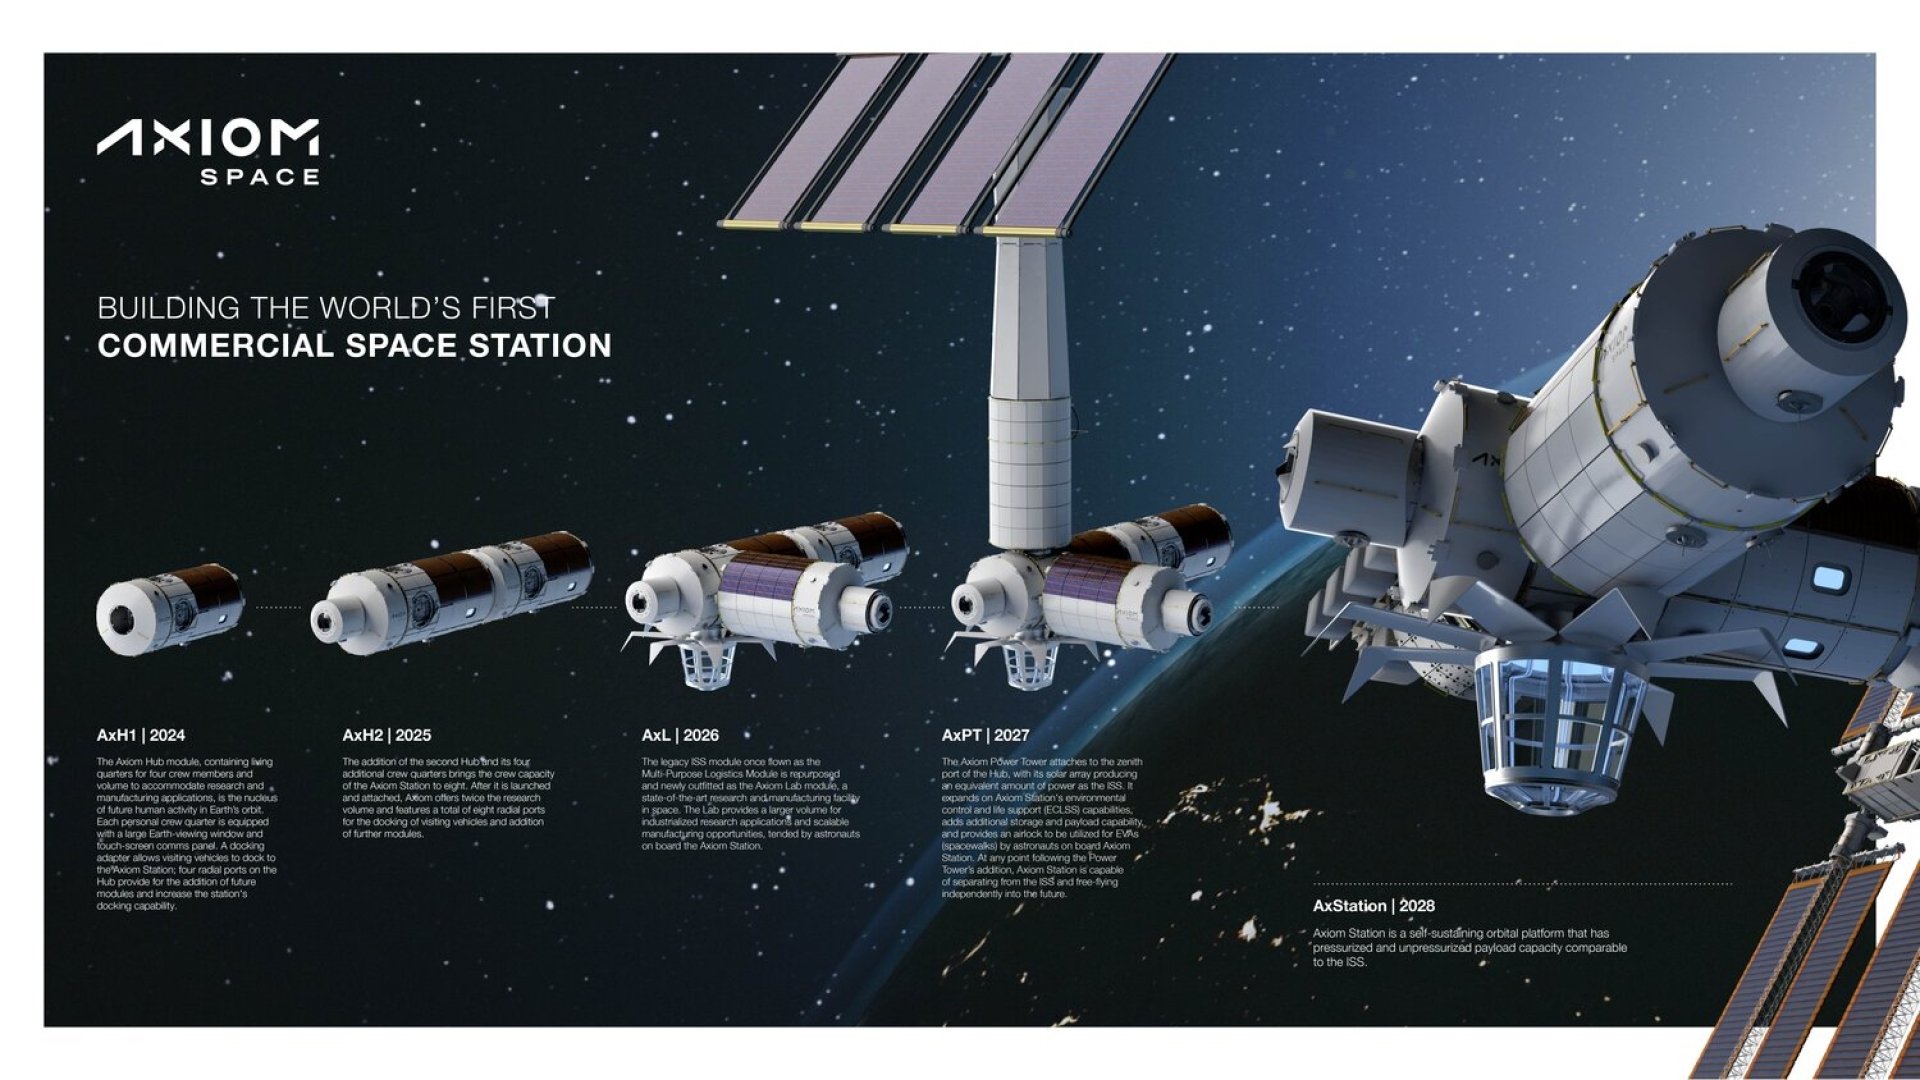 Axiom Space Station Infographic With Timeline